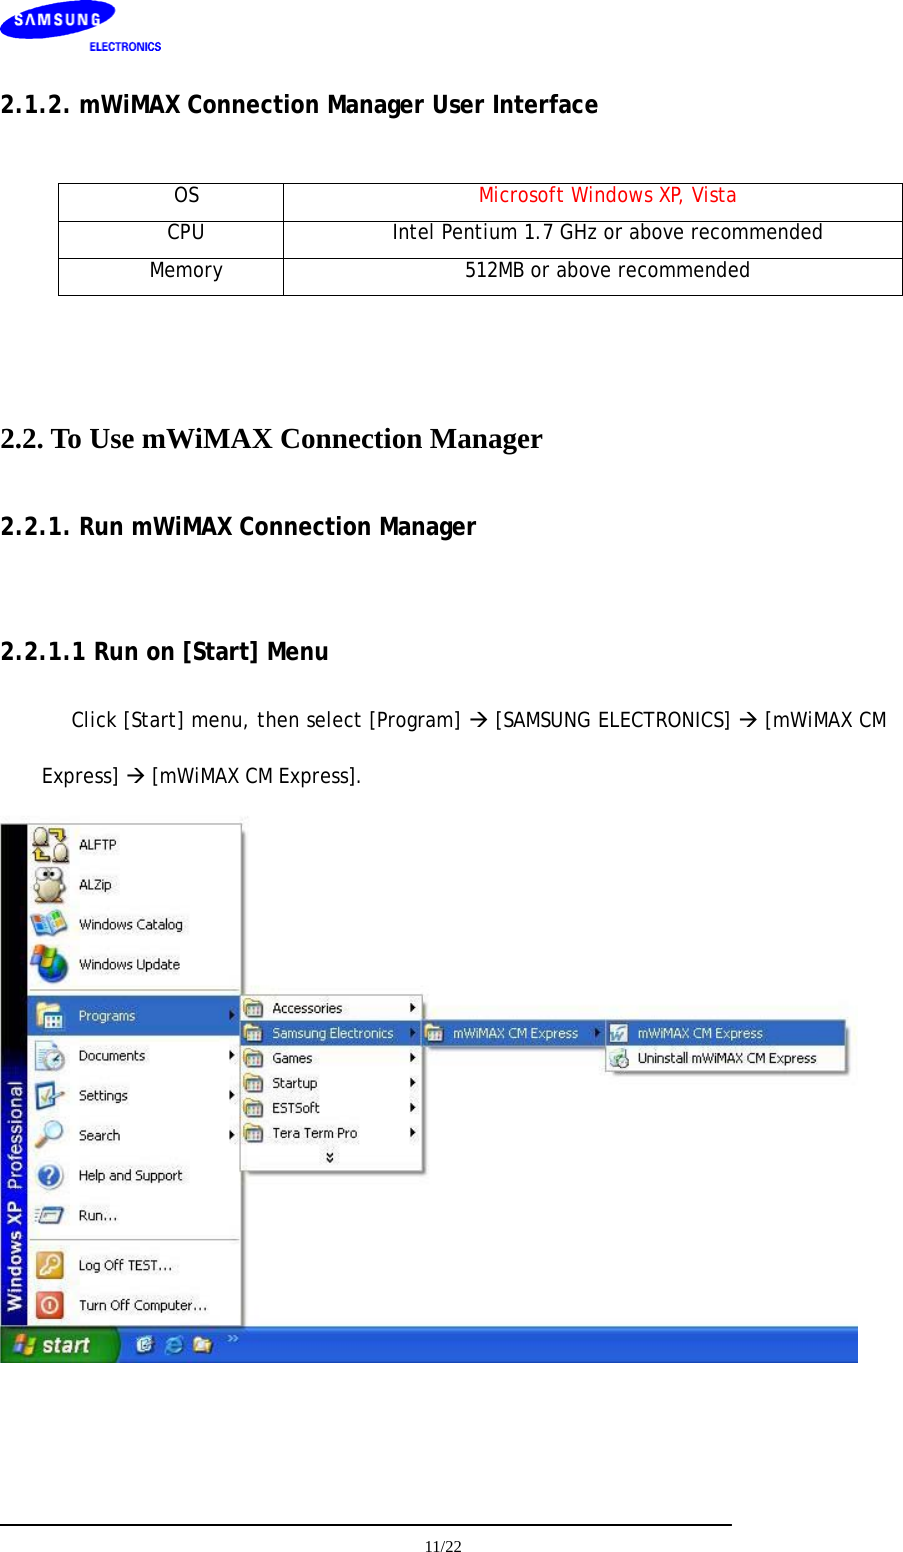     11/22  2.1.2. mWiMAX Connection Manager User Interface  OS Microsoft Windows XP, Vista CPU Intel Pentium 1.7 GHz or above recommended Memory  512MB or above recommended   2.2. To Use mWiMAX Connection Manager 2.2.1. Run mWiMAX Connection Manager  2.2.1.1 Run on [Start] Menu Click [Start] menu, then select [Program] Æ [SAMSUNG ELECTRONICS] Æ [mWiMAX CM Express] Æ [mWiMAX CM Express].   